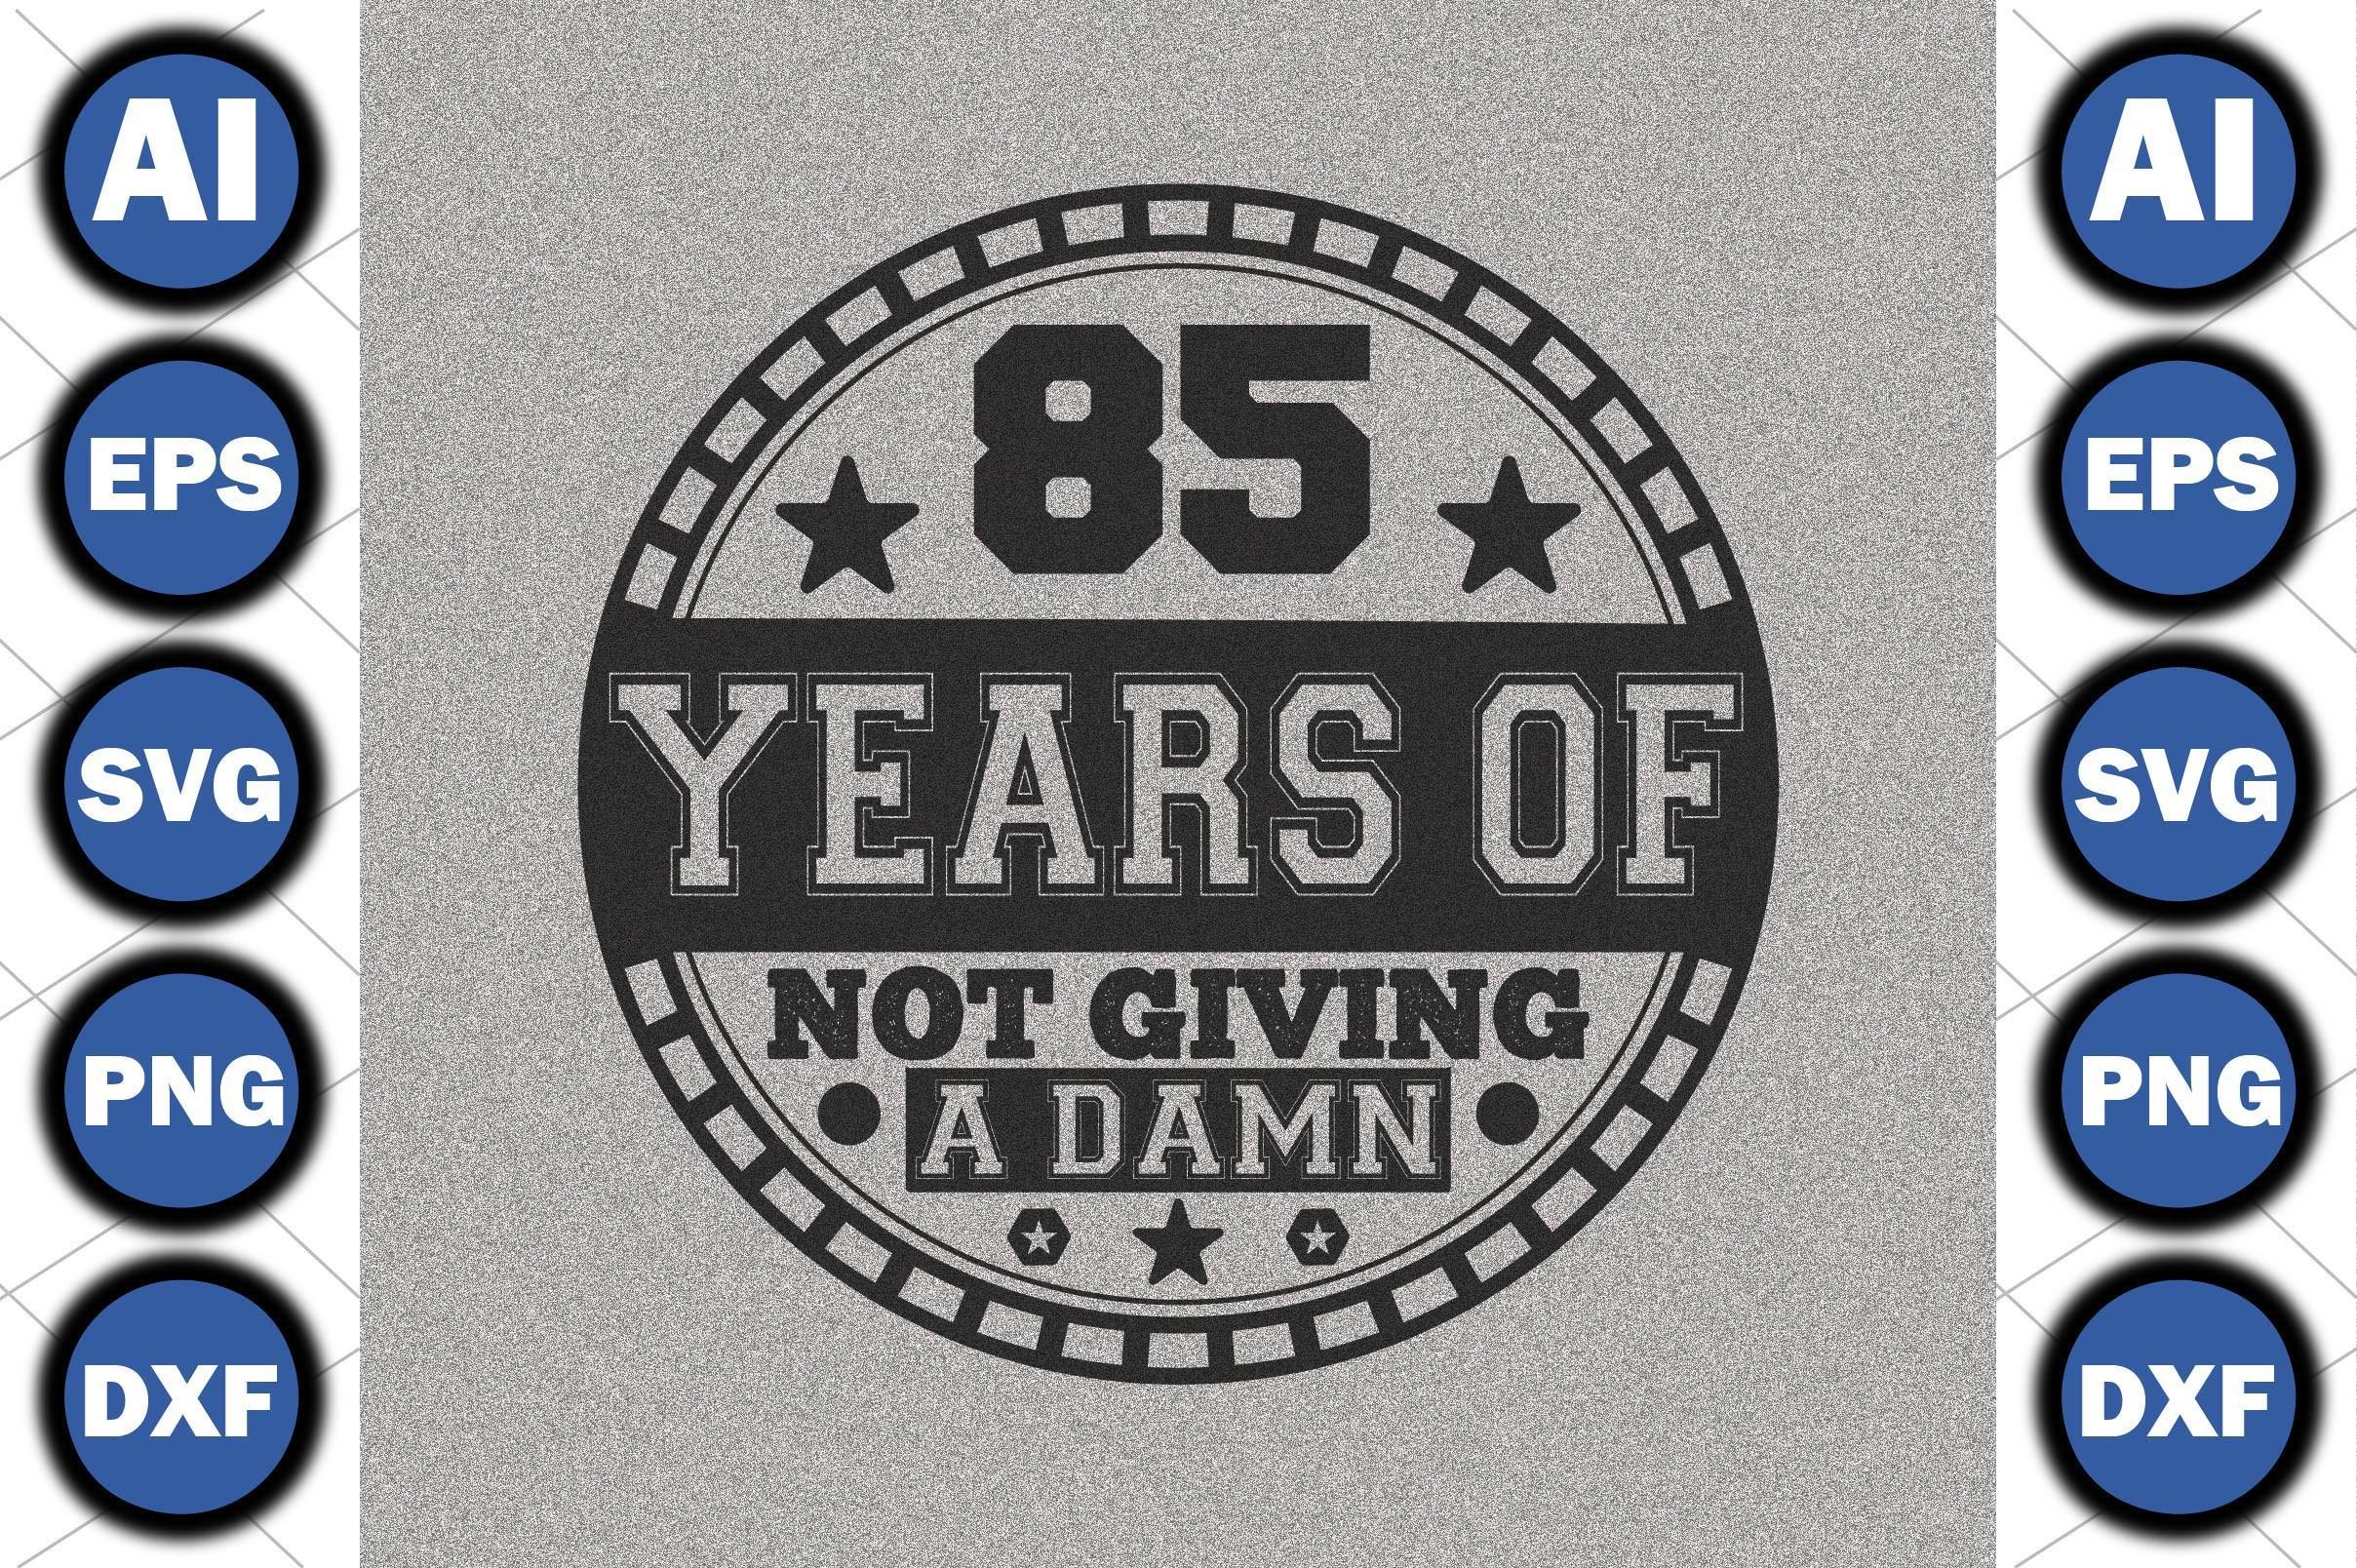 85 Years of Not Giving a Damn